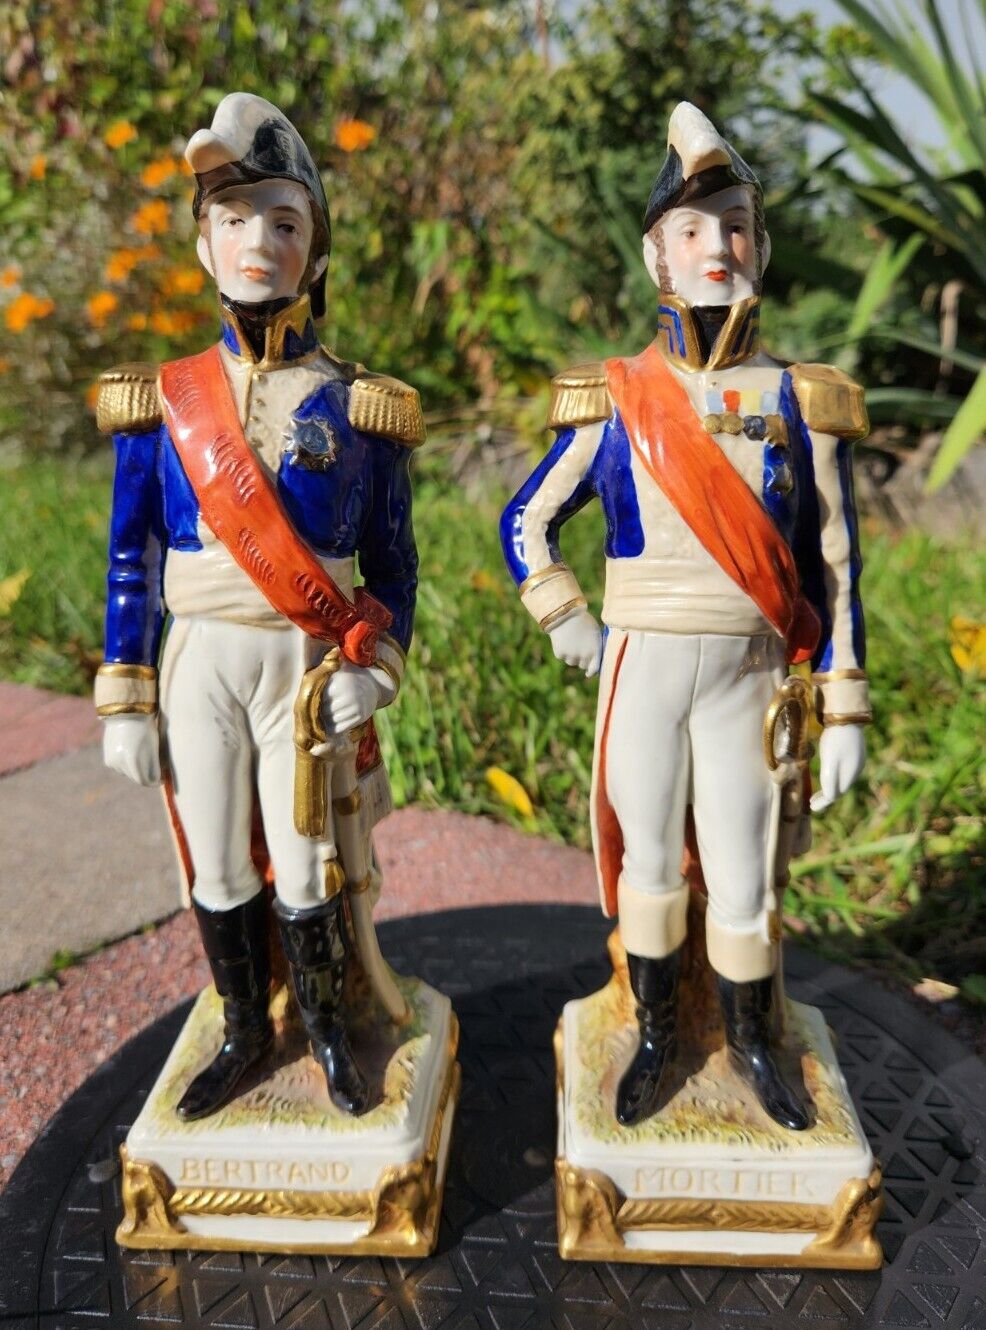 Scheibe-Alsbach Napoleonic Officers Mortier & Bertrand German Porcelain